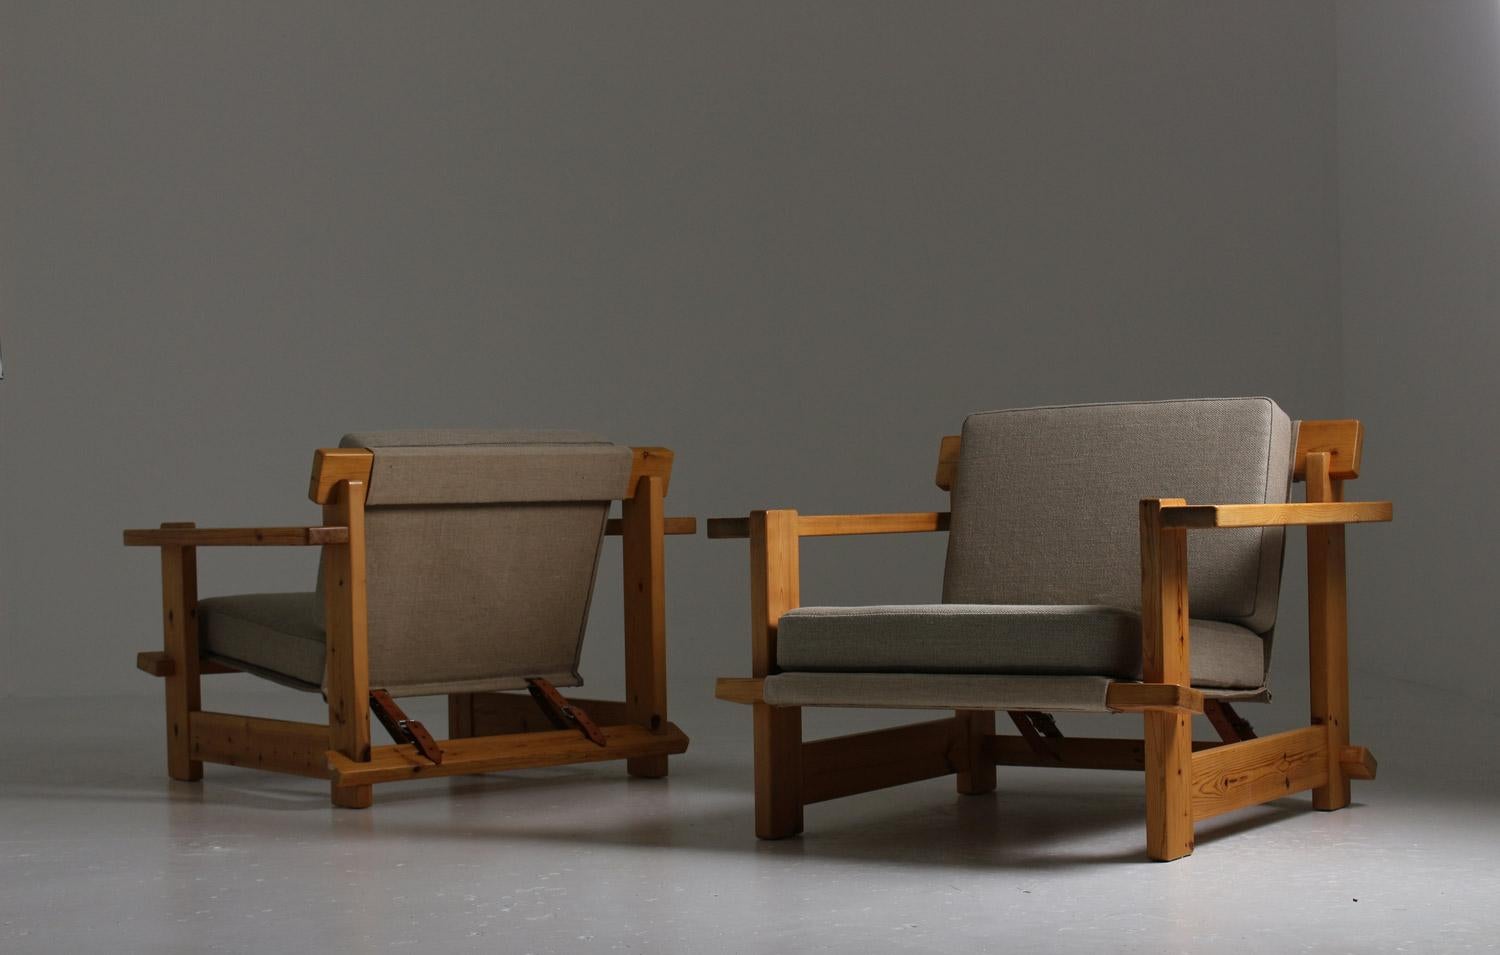 Pair of 1970s lounge chairs in pine by unknown Swedish manufacturer.
This lounge chairs are a great example of Scandinavian 1970s brutalistic pine furniture. The design is quite genius, with only the leather straps holding the chairs